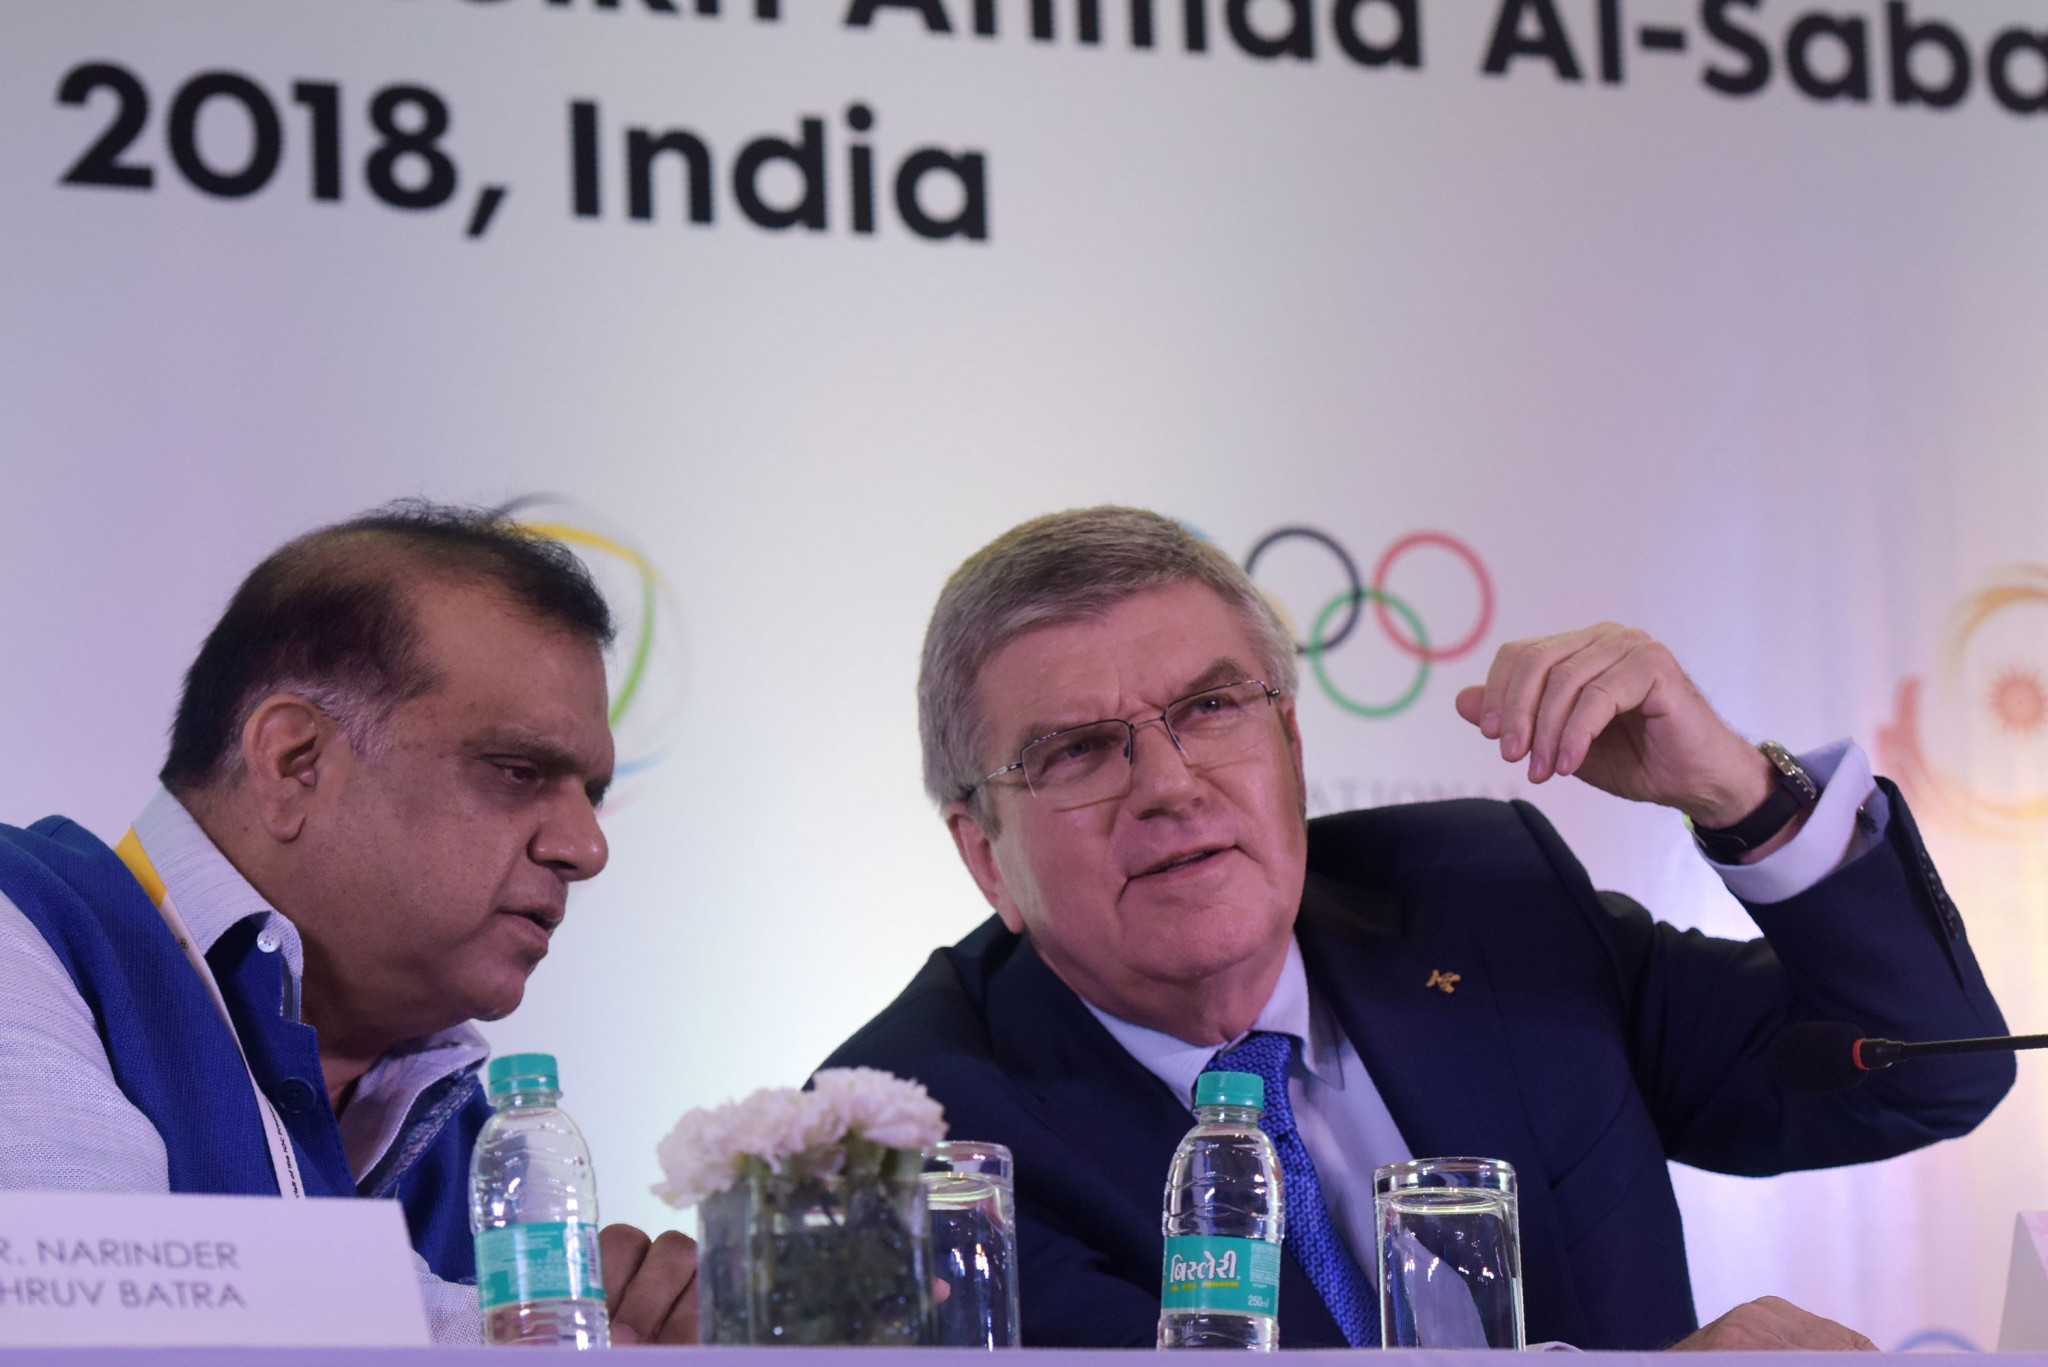 The letter providing the required guarantees was sent to IOA President Narinder Batra, left, and IOC President Thomas Bach, right ©Getty Images